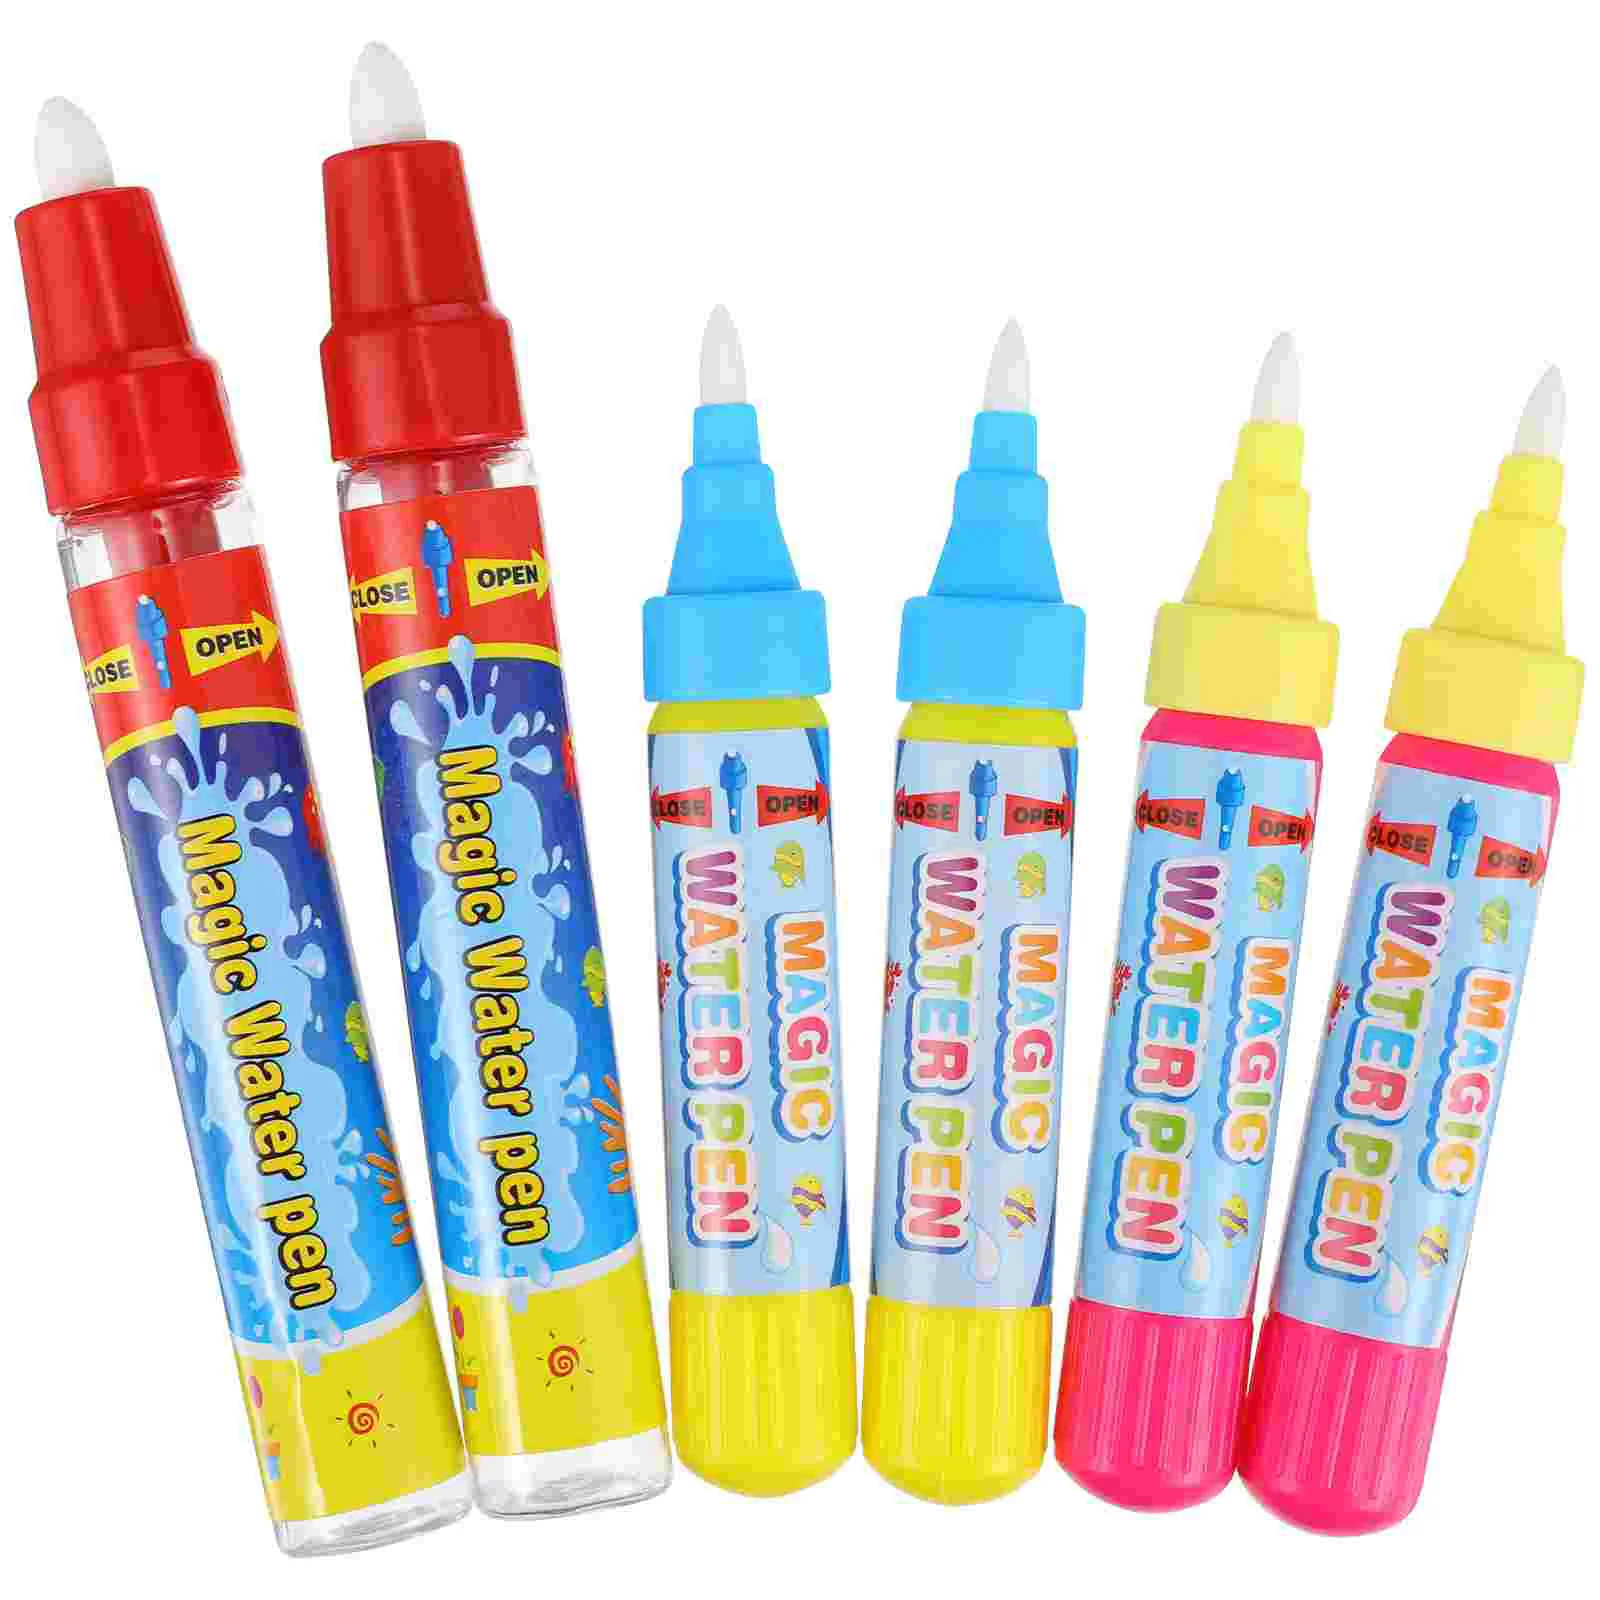 

6 Pcs Drawing Water Pens Markers Painting Big Money for Toddlers Students Graffiti Child Supplies Brush